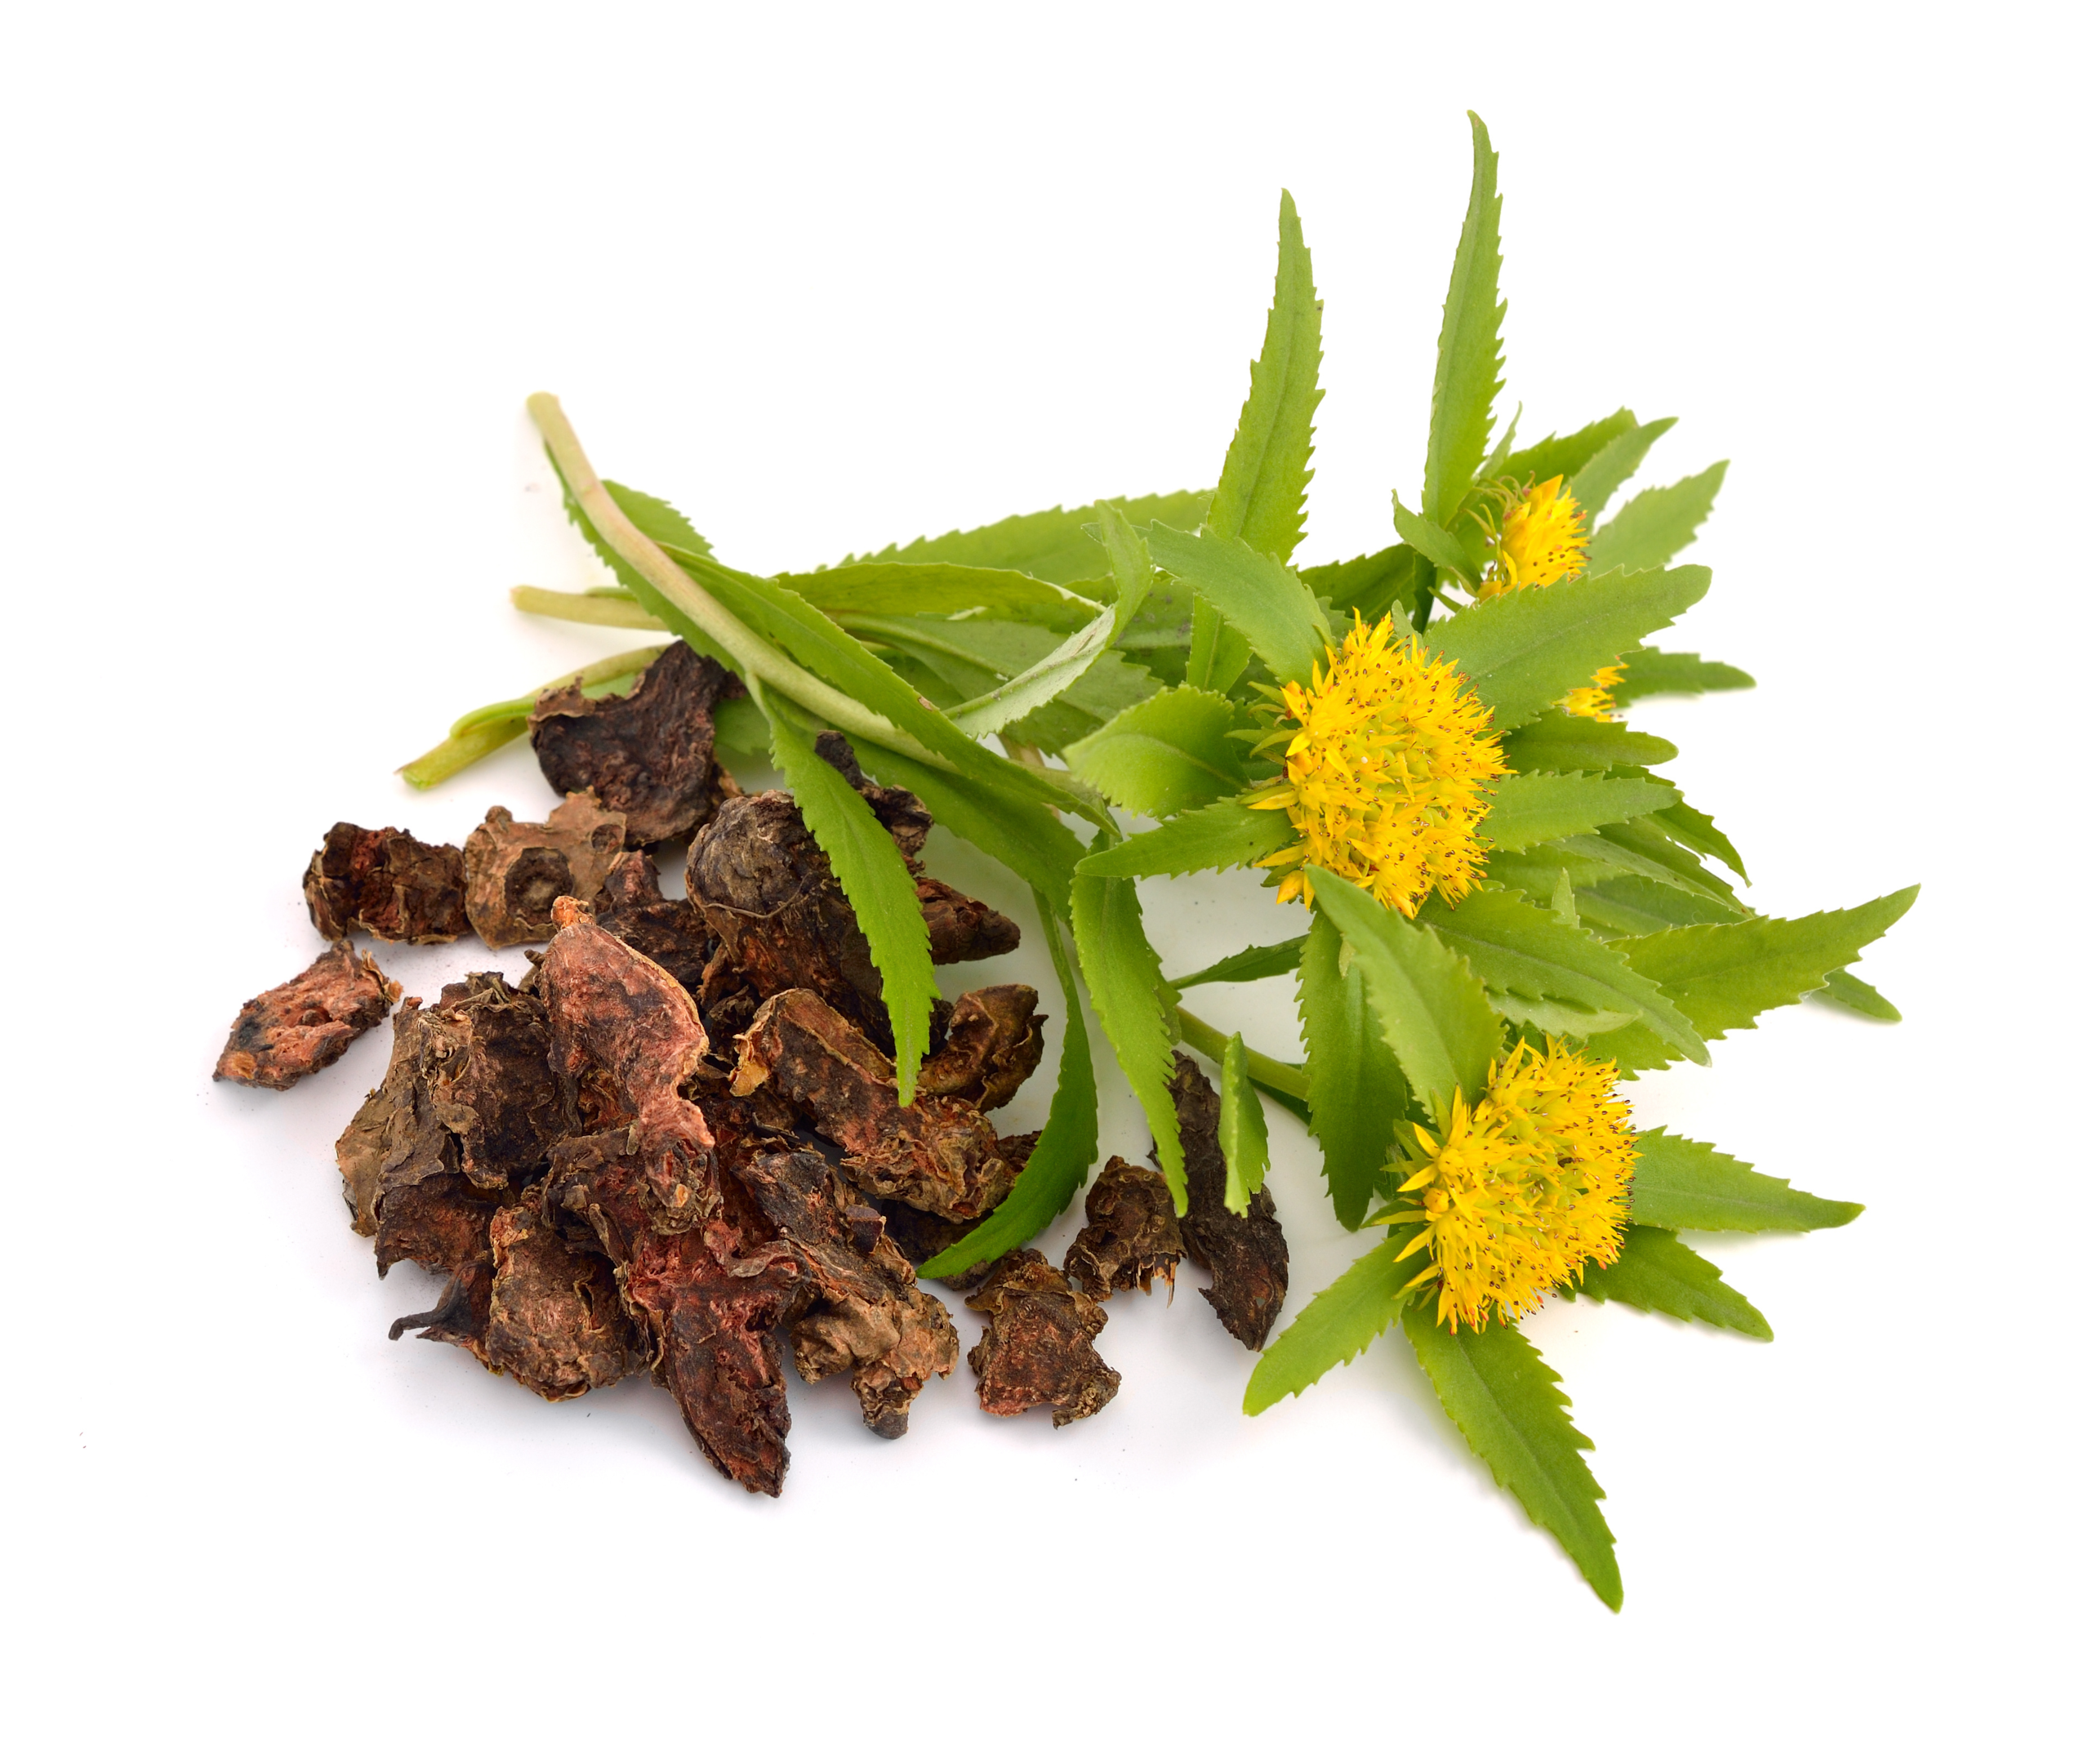 rhodiola extracts